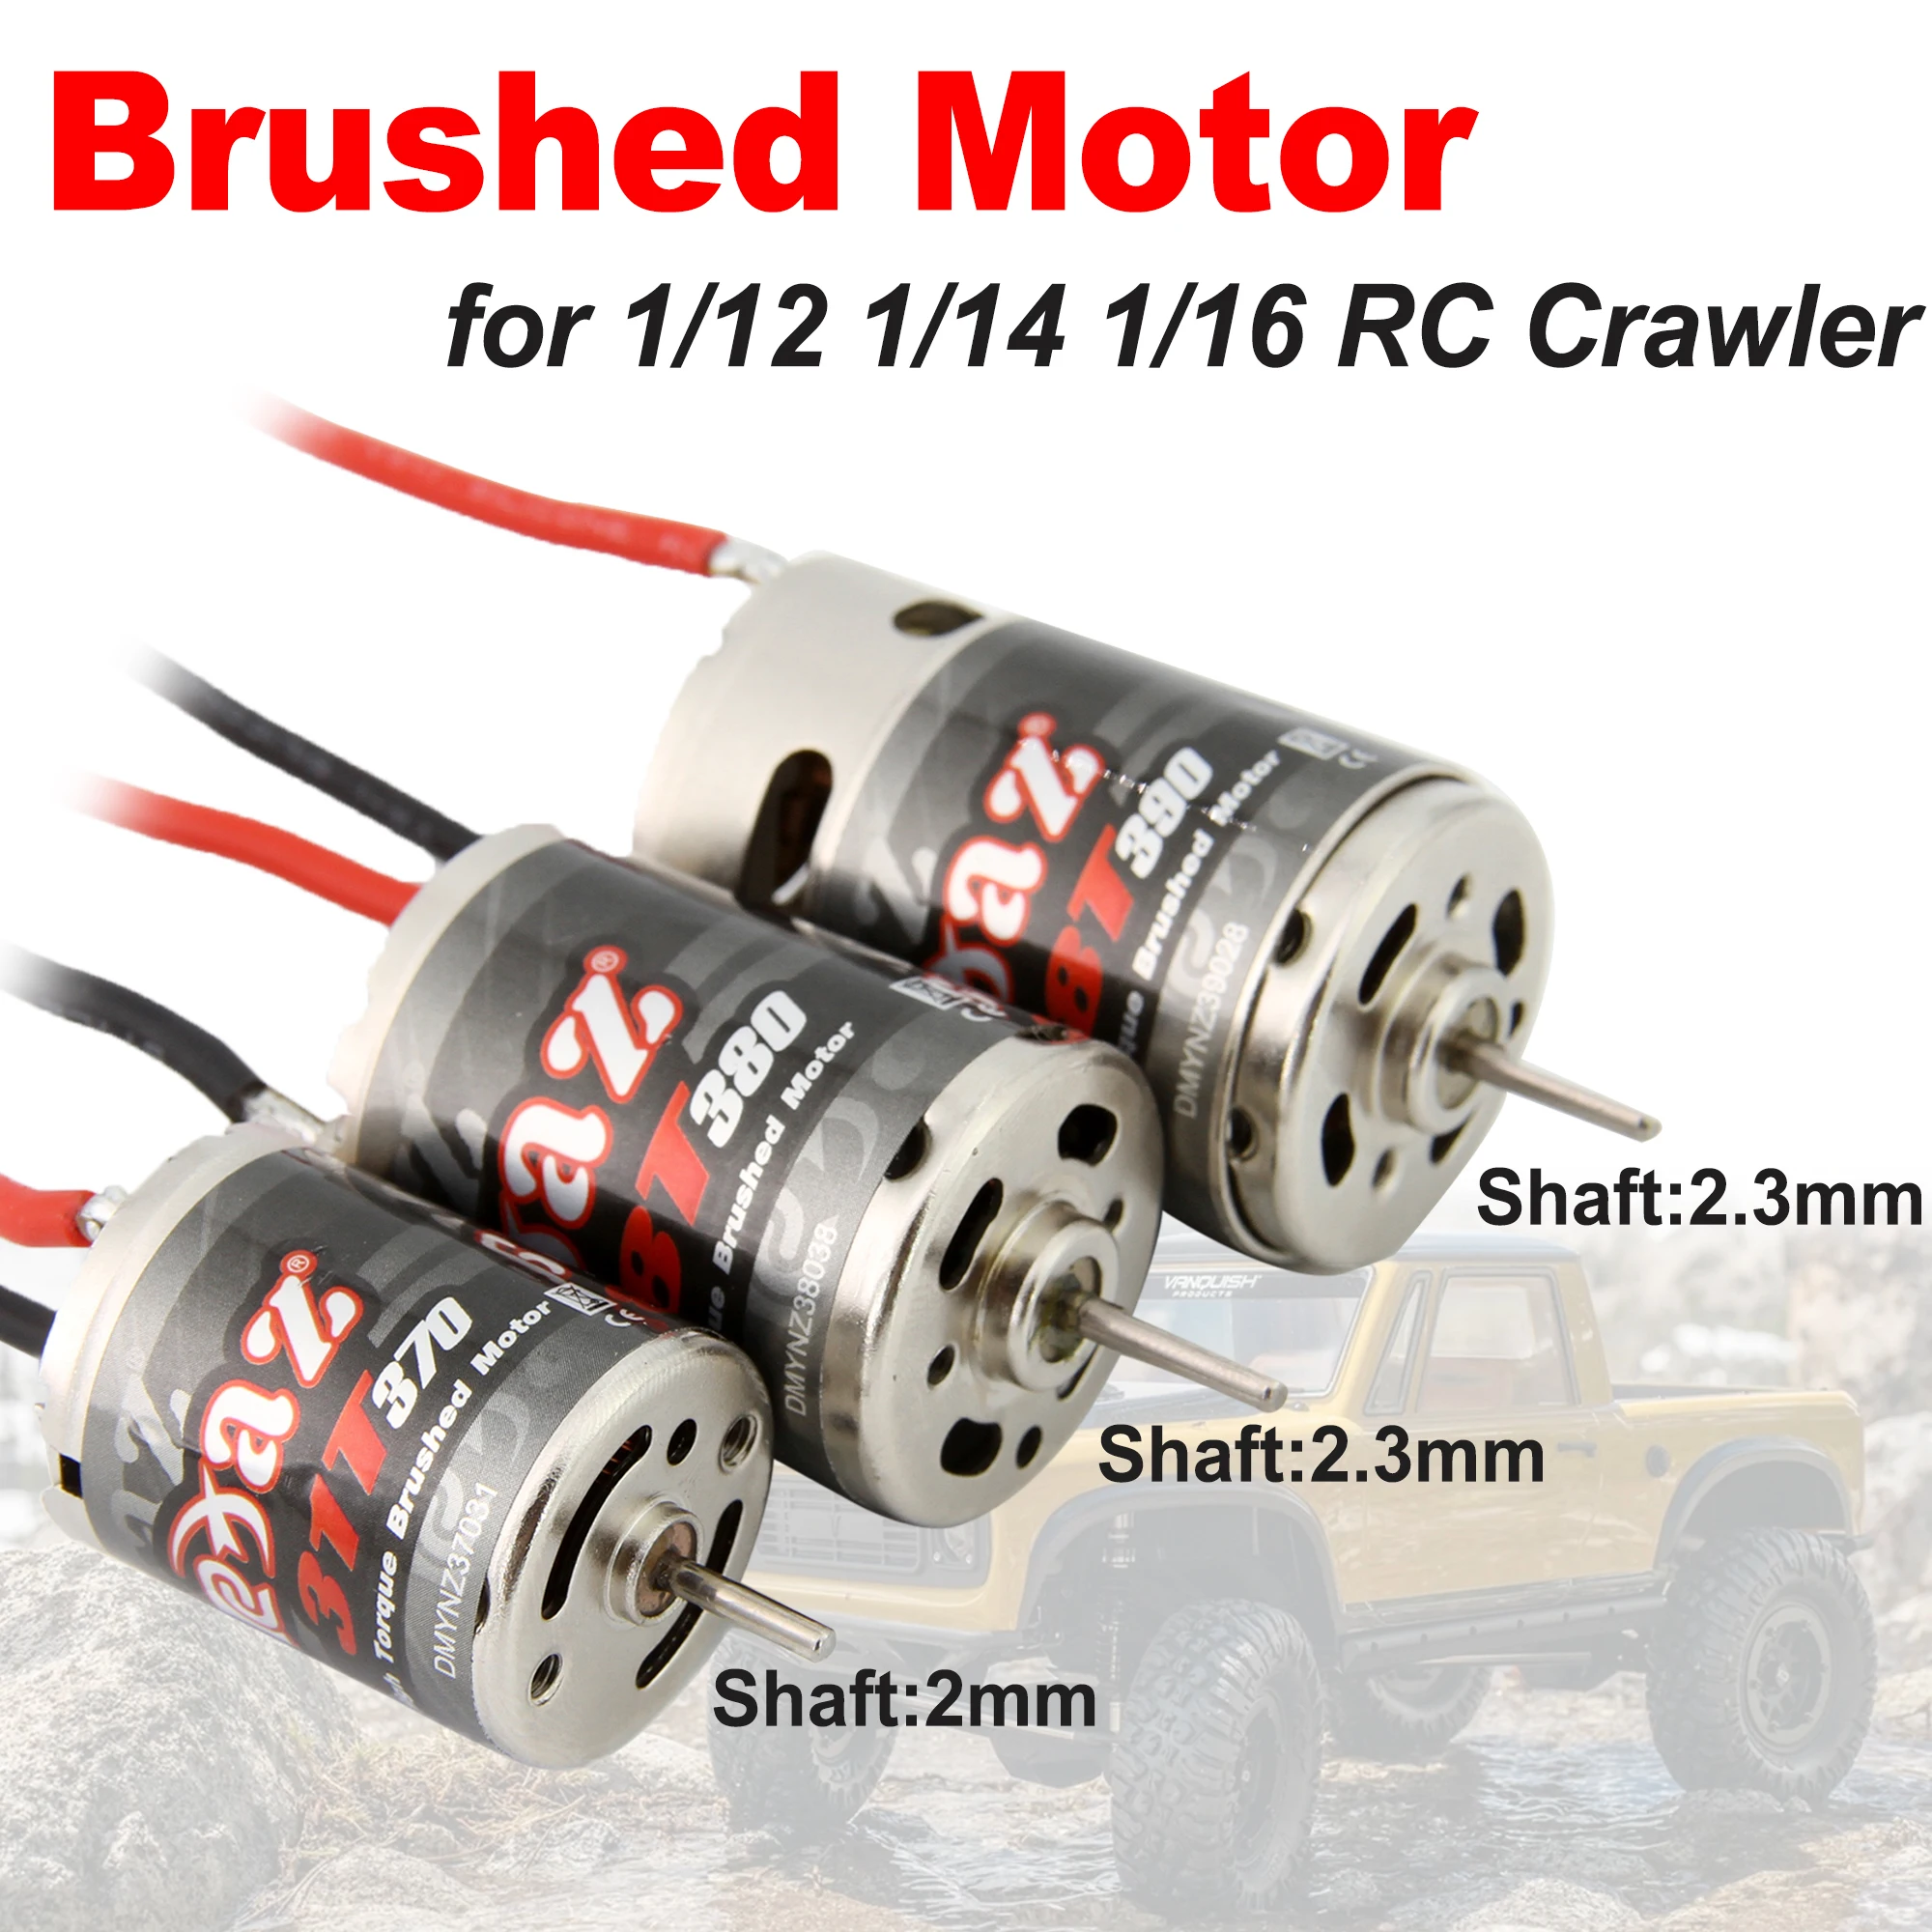 

370 380 390 Stainless Steel 7.2V DC Brushed Motor for 1/12 1/14 1/16 1/24 RC Crawler Monster AXIAL SCX24 B17 TAM54393 TRX 7075